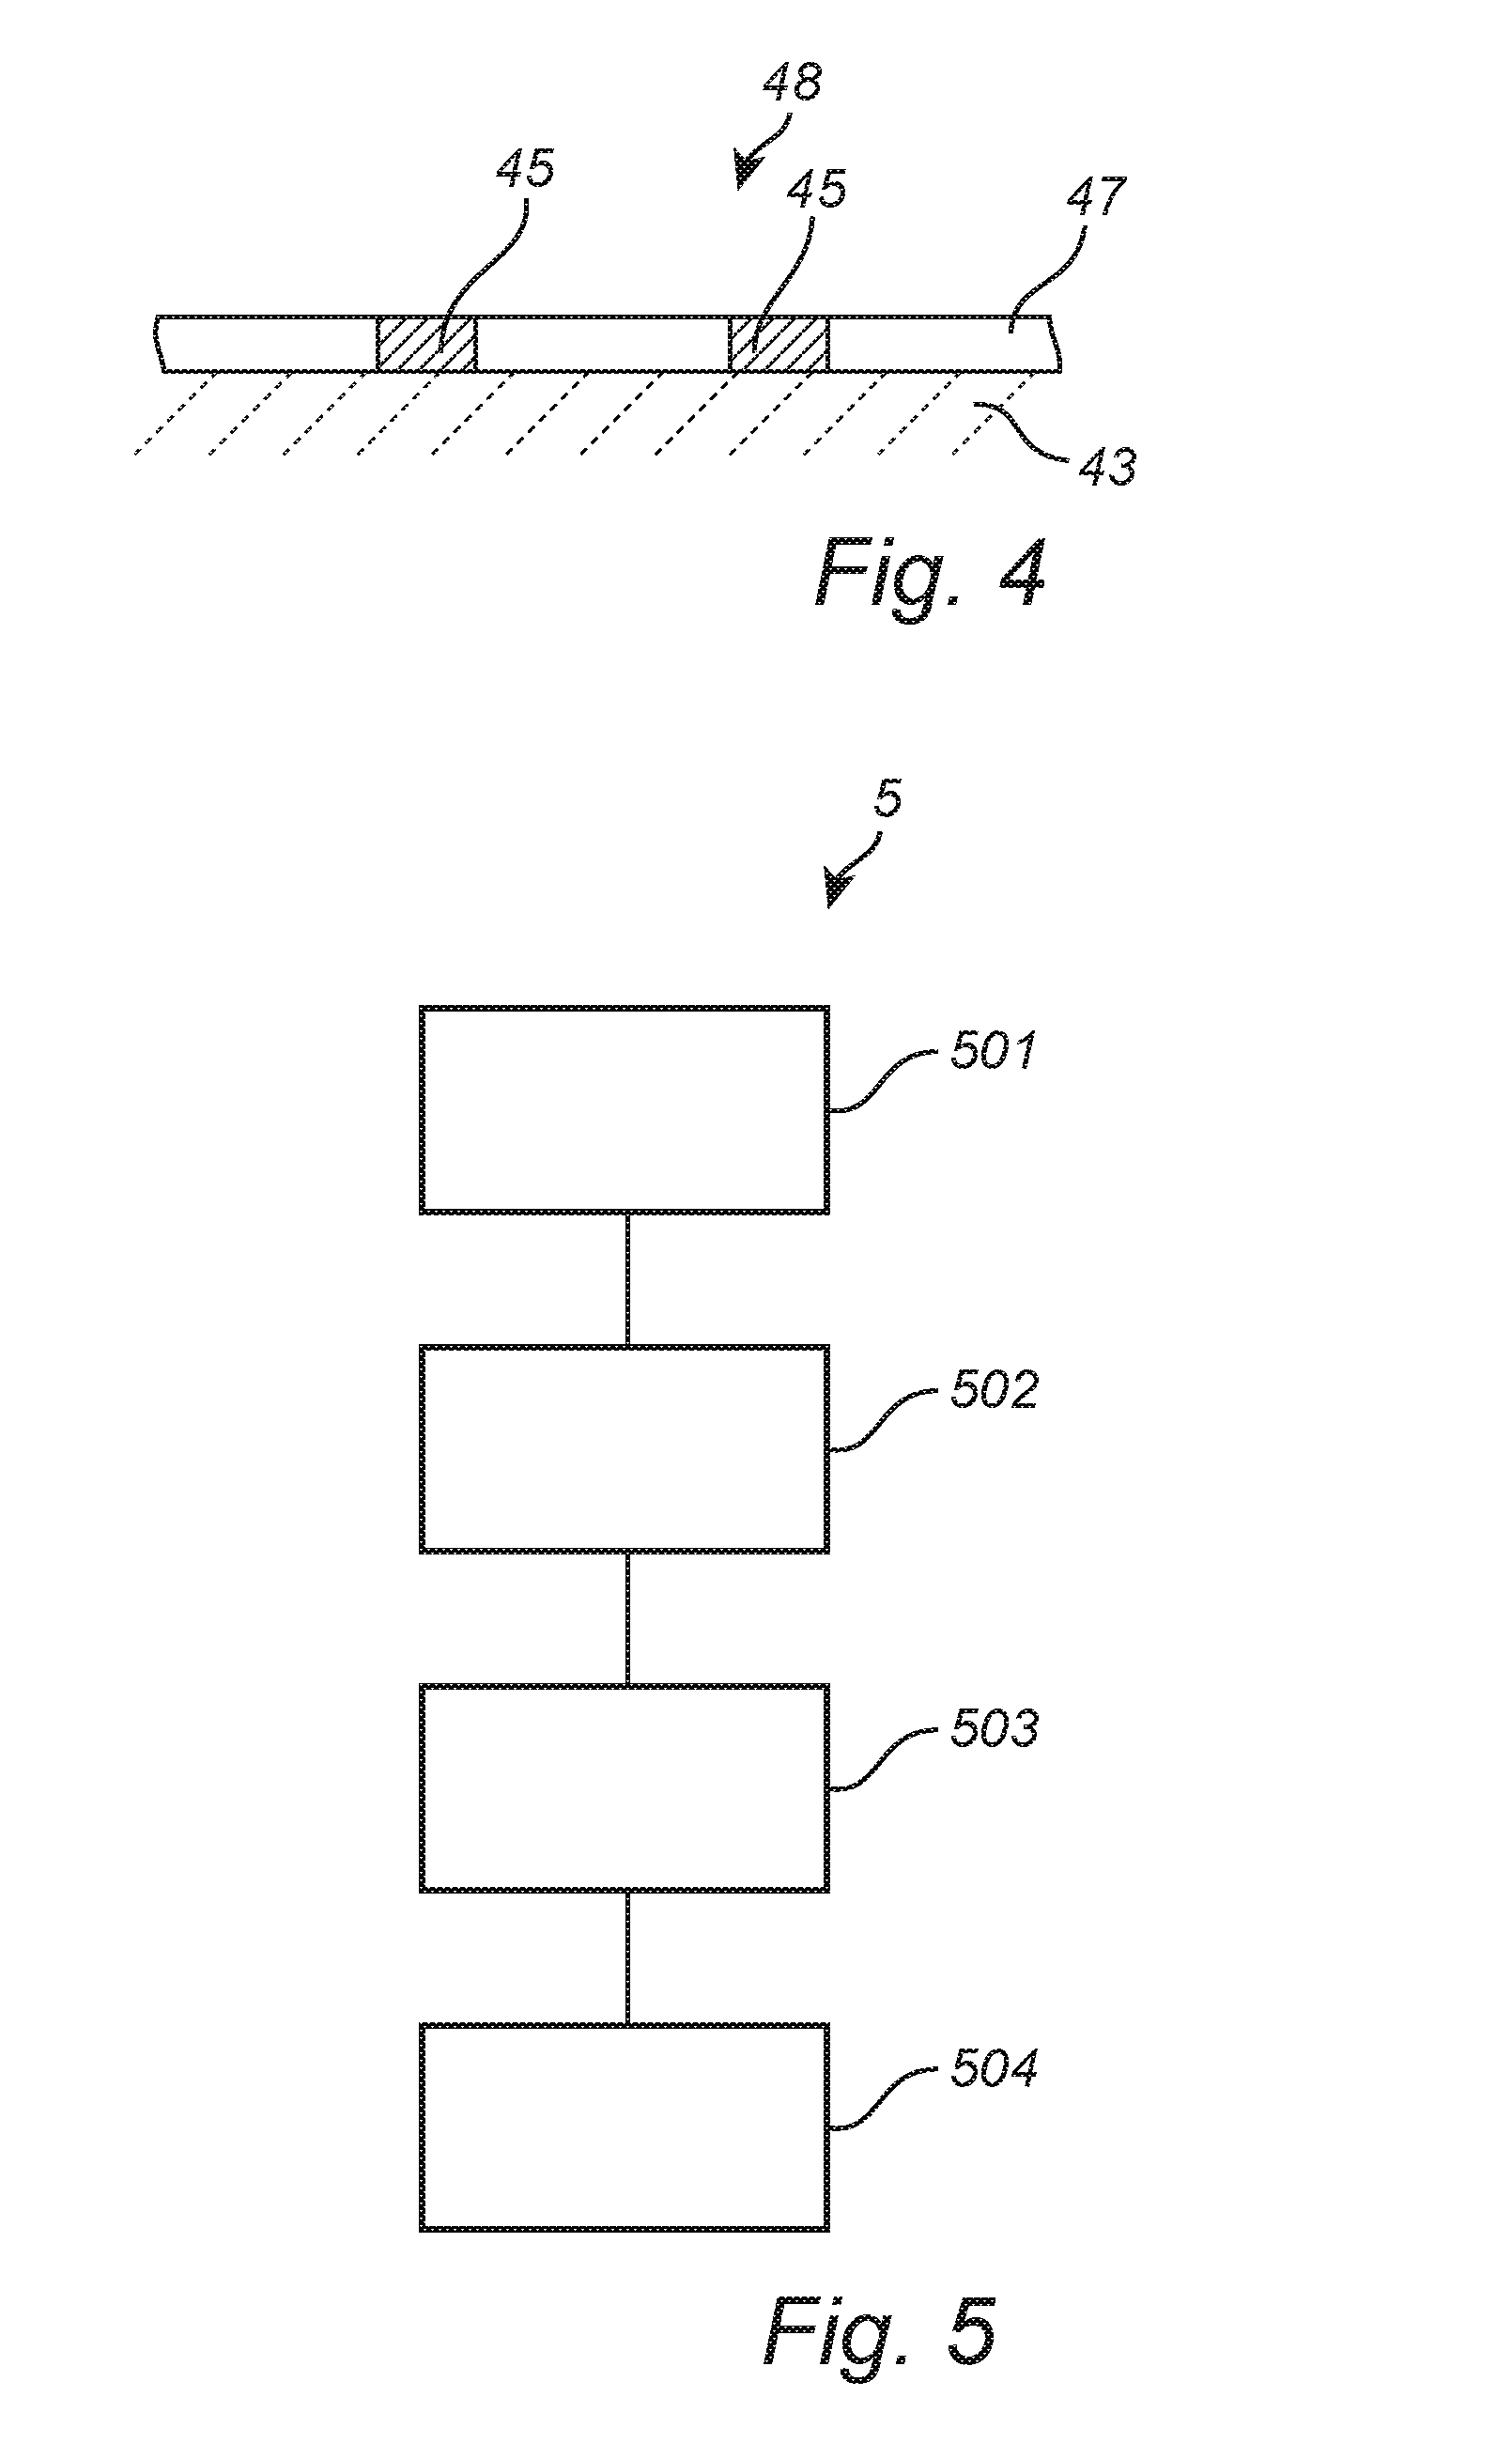 Electronic shelf label having a marking defined by means of laser